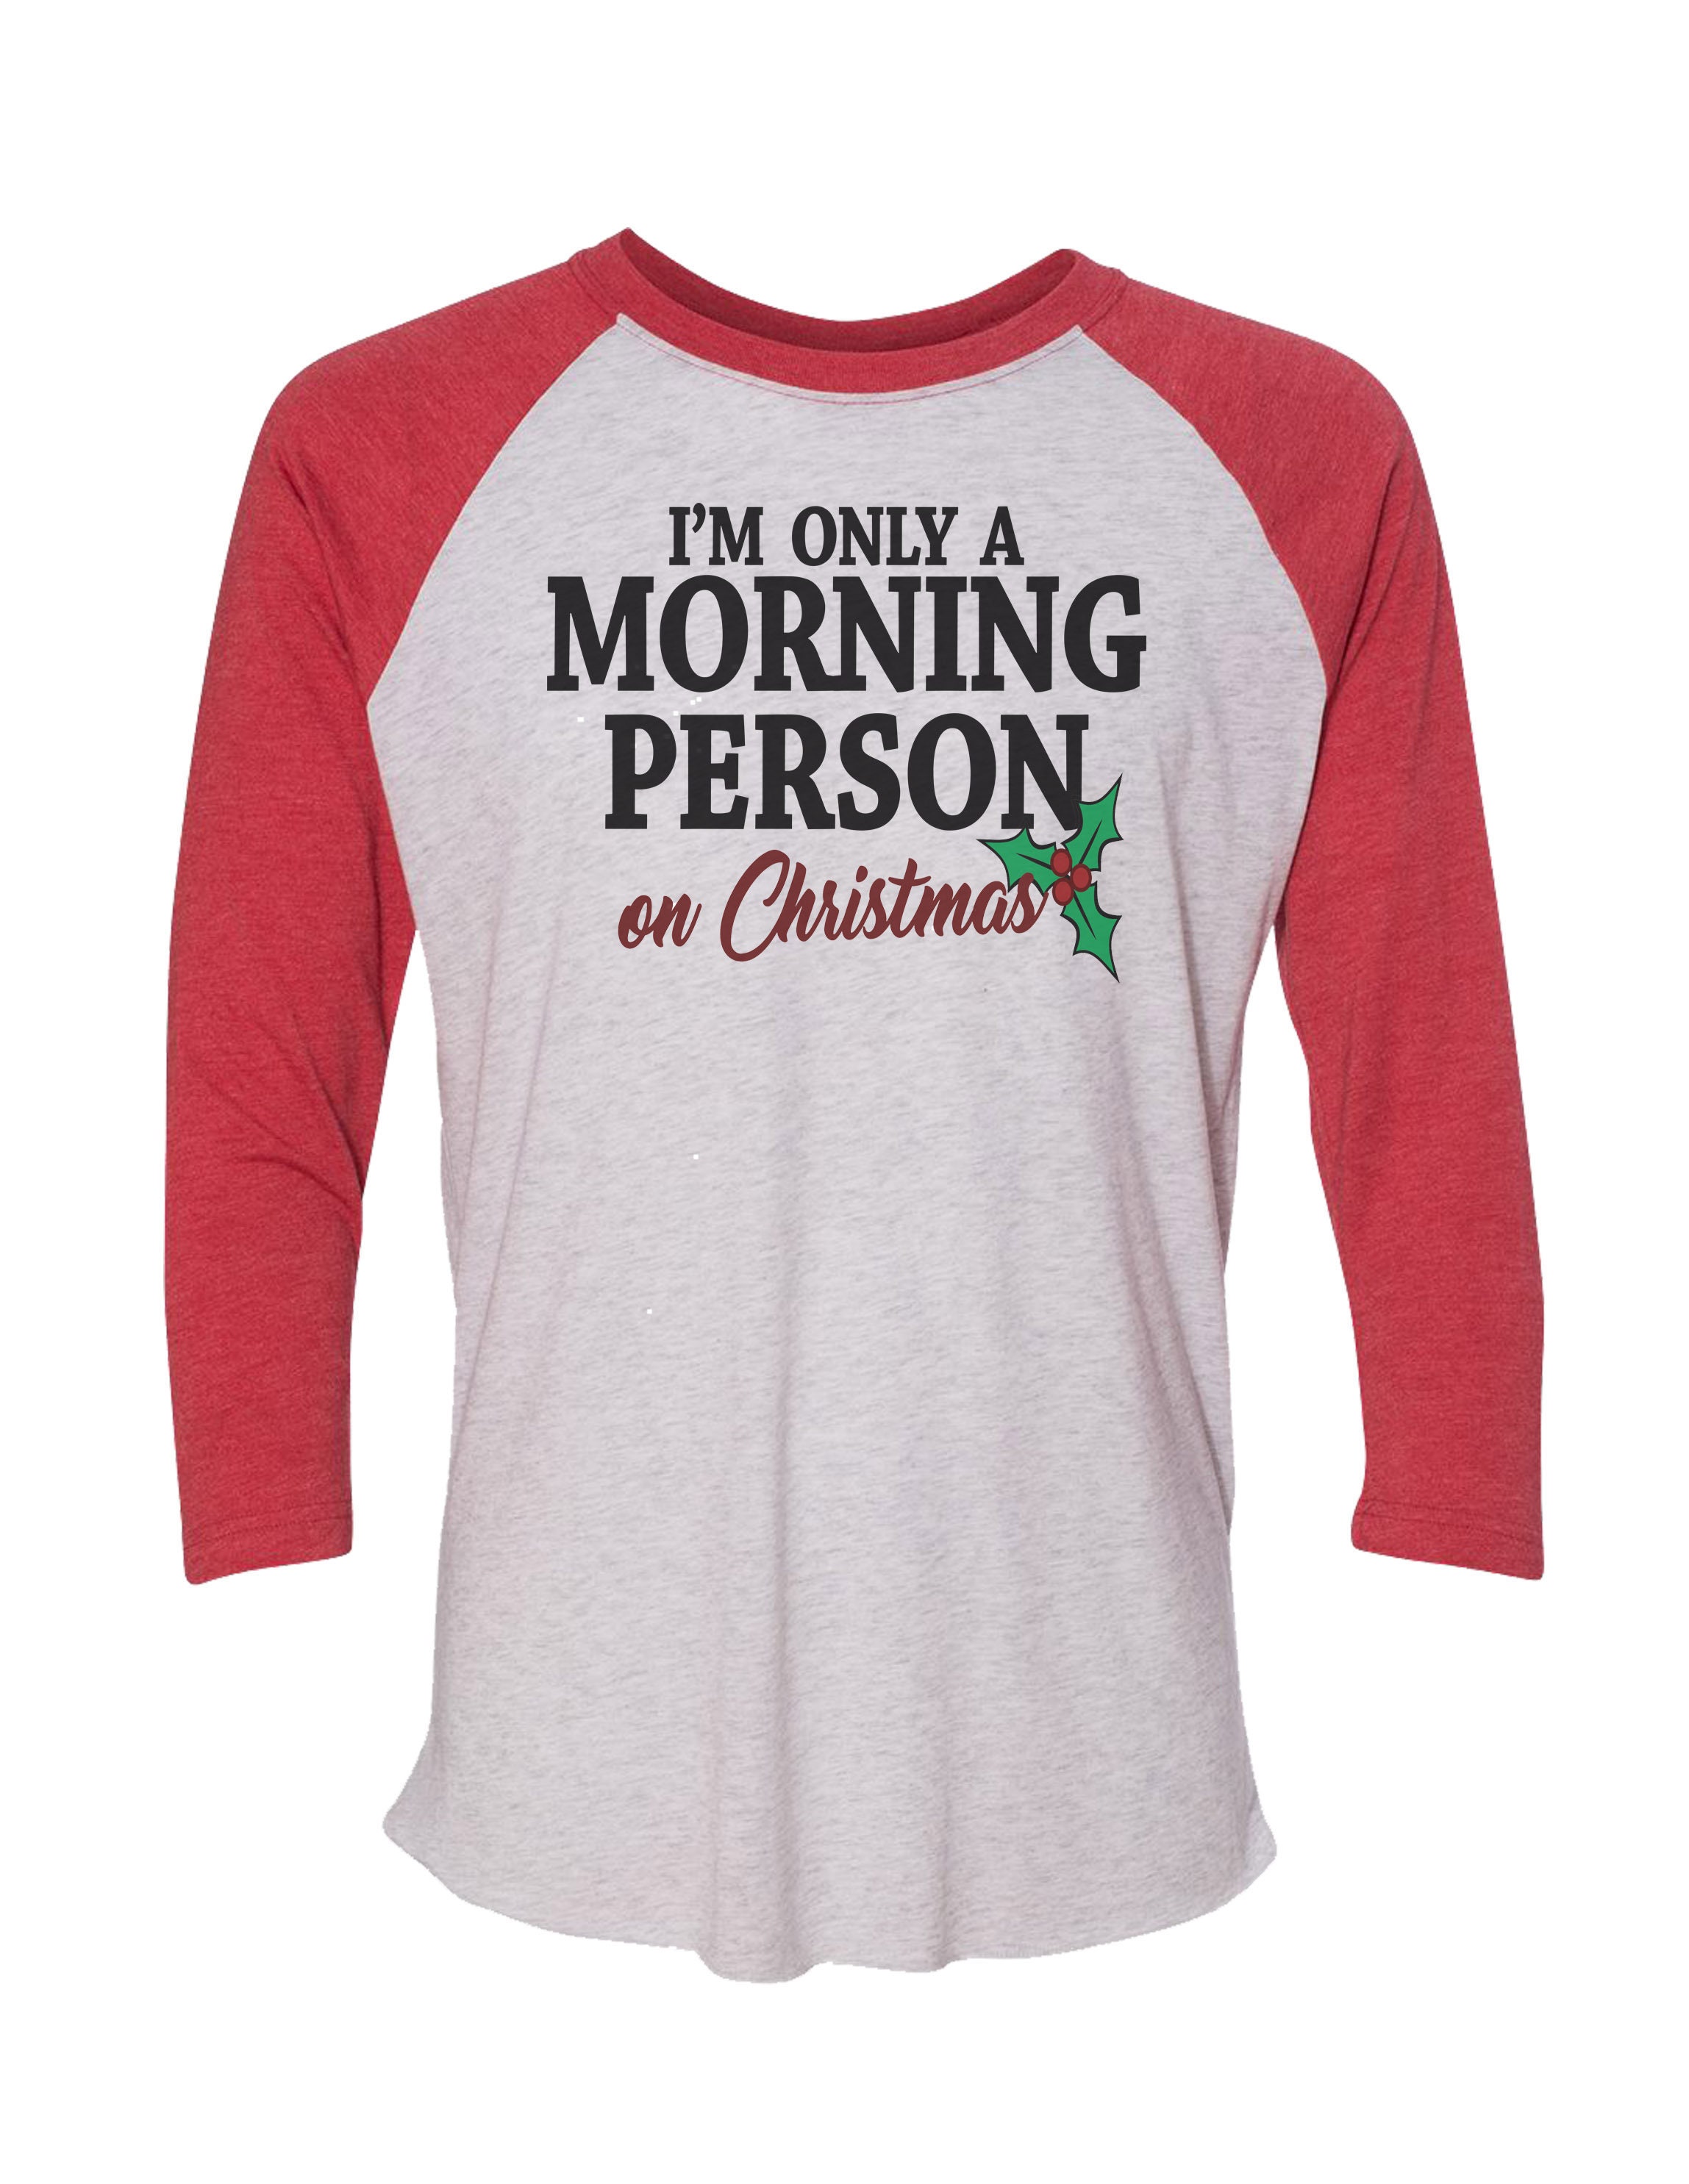 Unisex Christmas Super Soft Tri-Blend Baseball Style Shirt Im Only A Morning Person On Ugly Sweater Party Holiday - 5144"